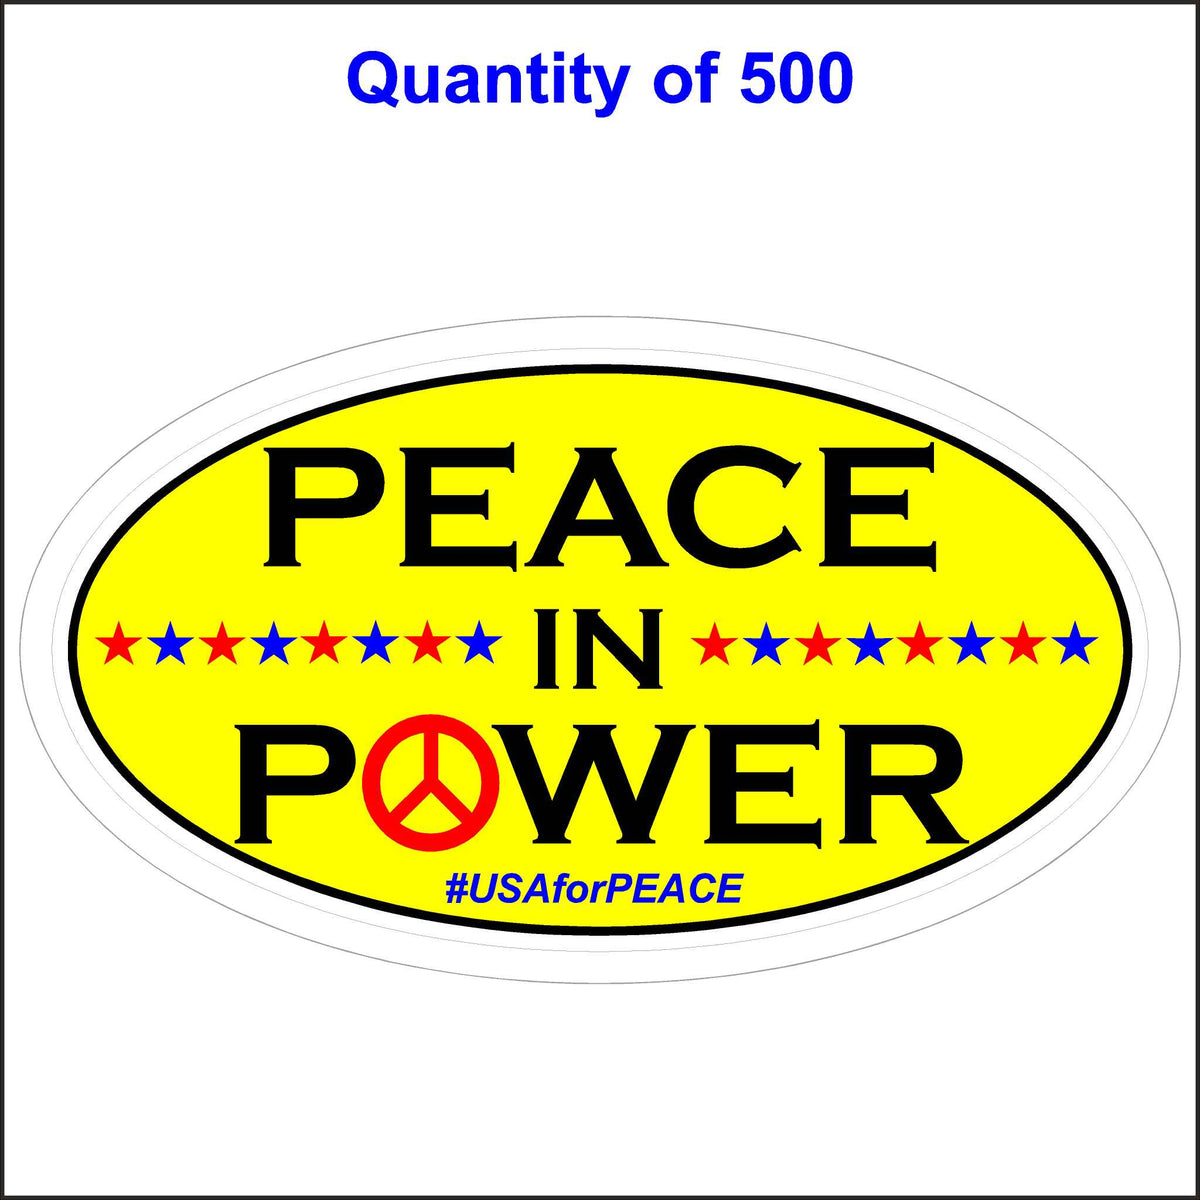 Peace in Power - Peace Sticker, USA For Peace. 500 Quantity.